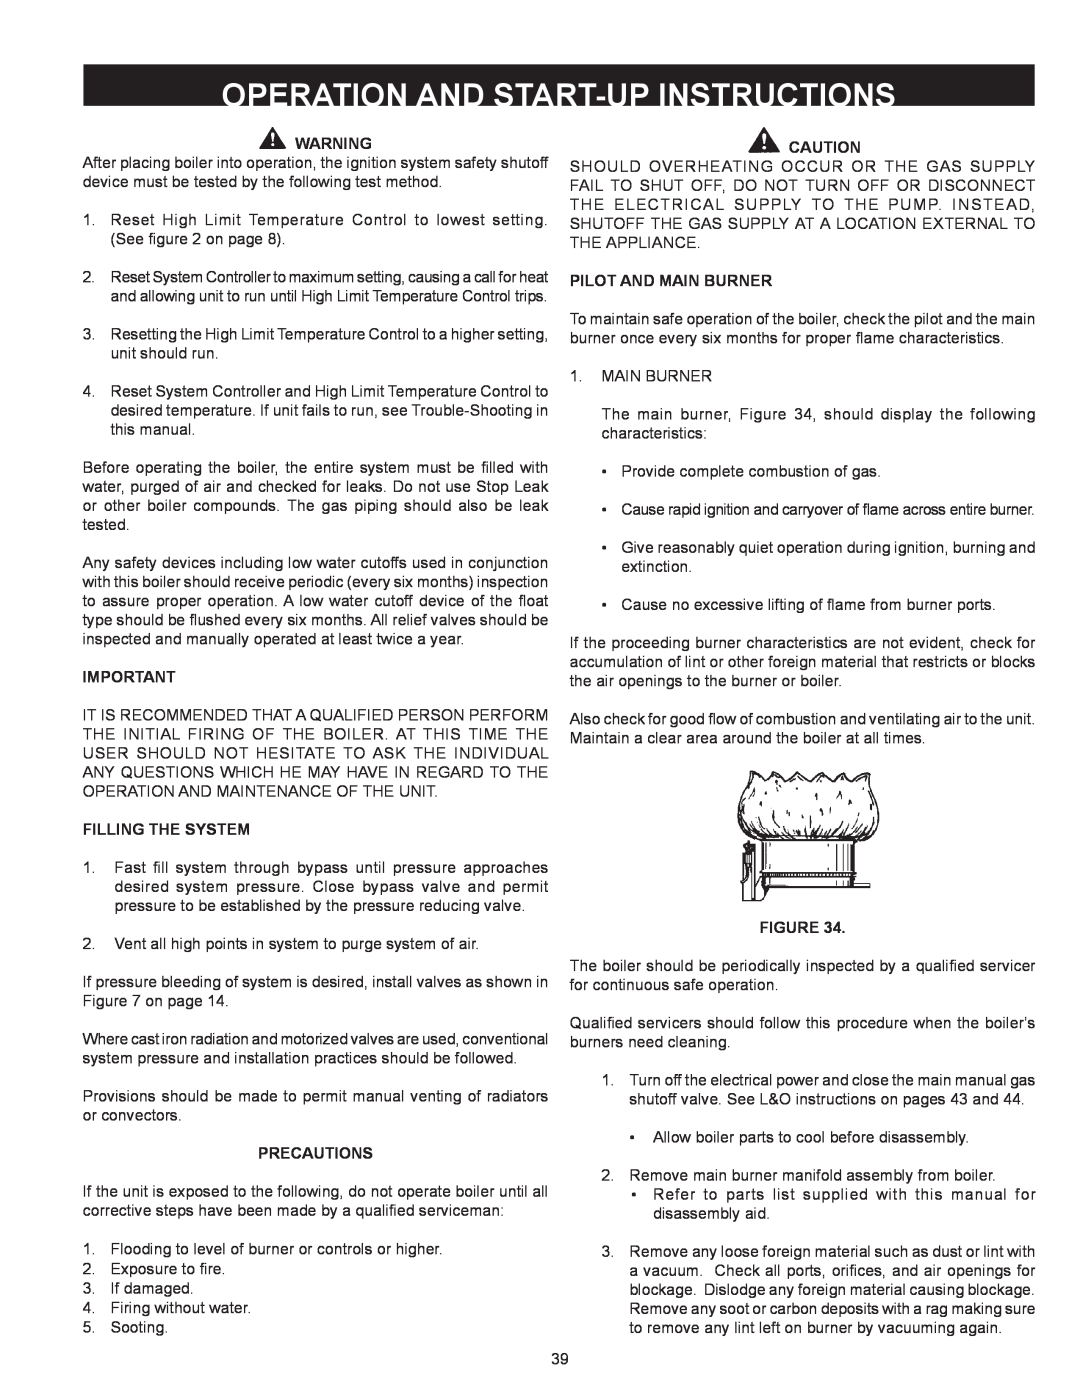 A.O. Smith HW 610 warranty Operation And Start-Up Instructions, Filling The System, Precautions, Pilot And Main Burner 